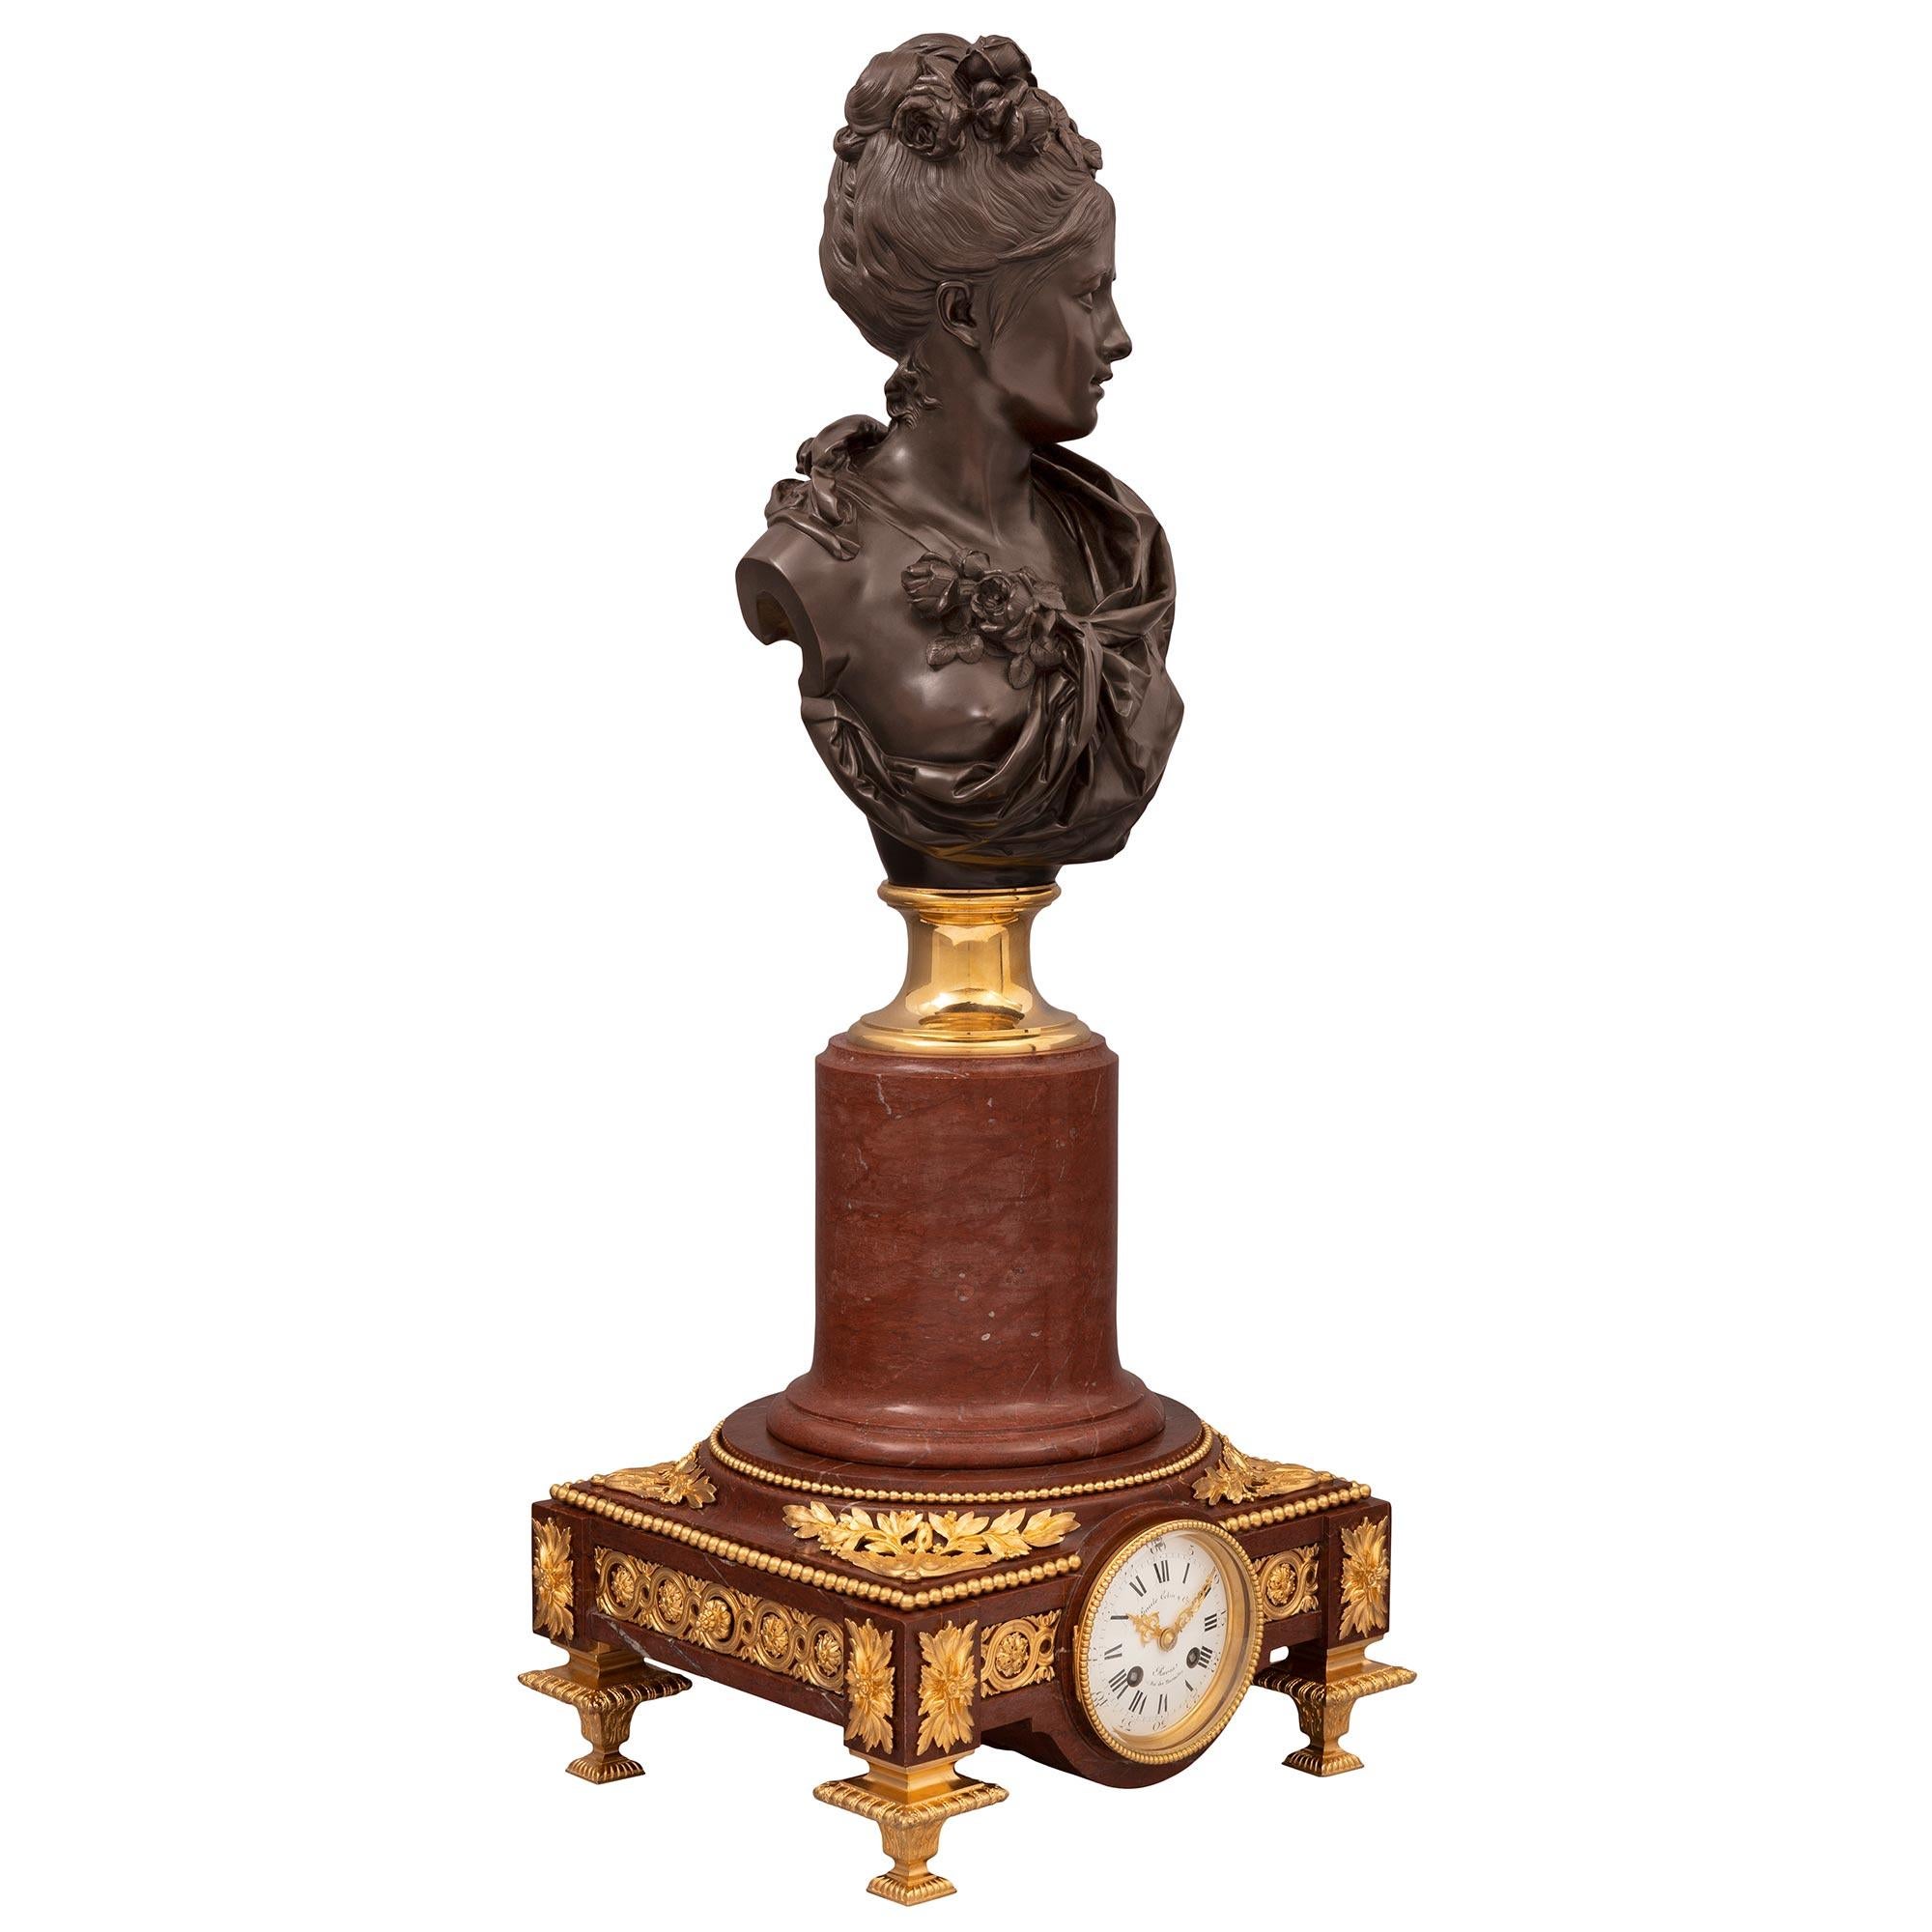 An impressive and high quality French 19th century Louis XVI st. Belle Époque period Rouge Griotte marble, ormolu and patinated bronze clock and bust by Emile Colin & Cie and A. Carrier. The clock is raised by unique and extremely decorative curved